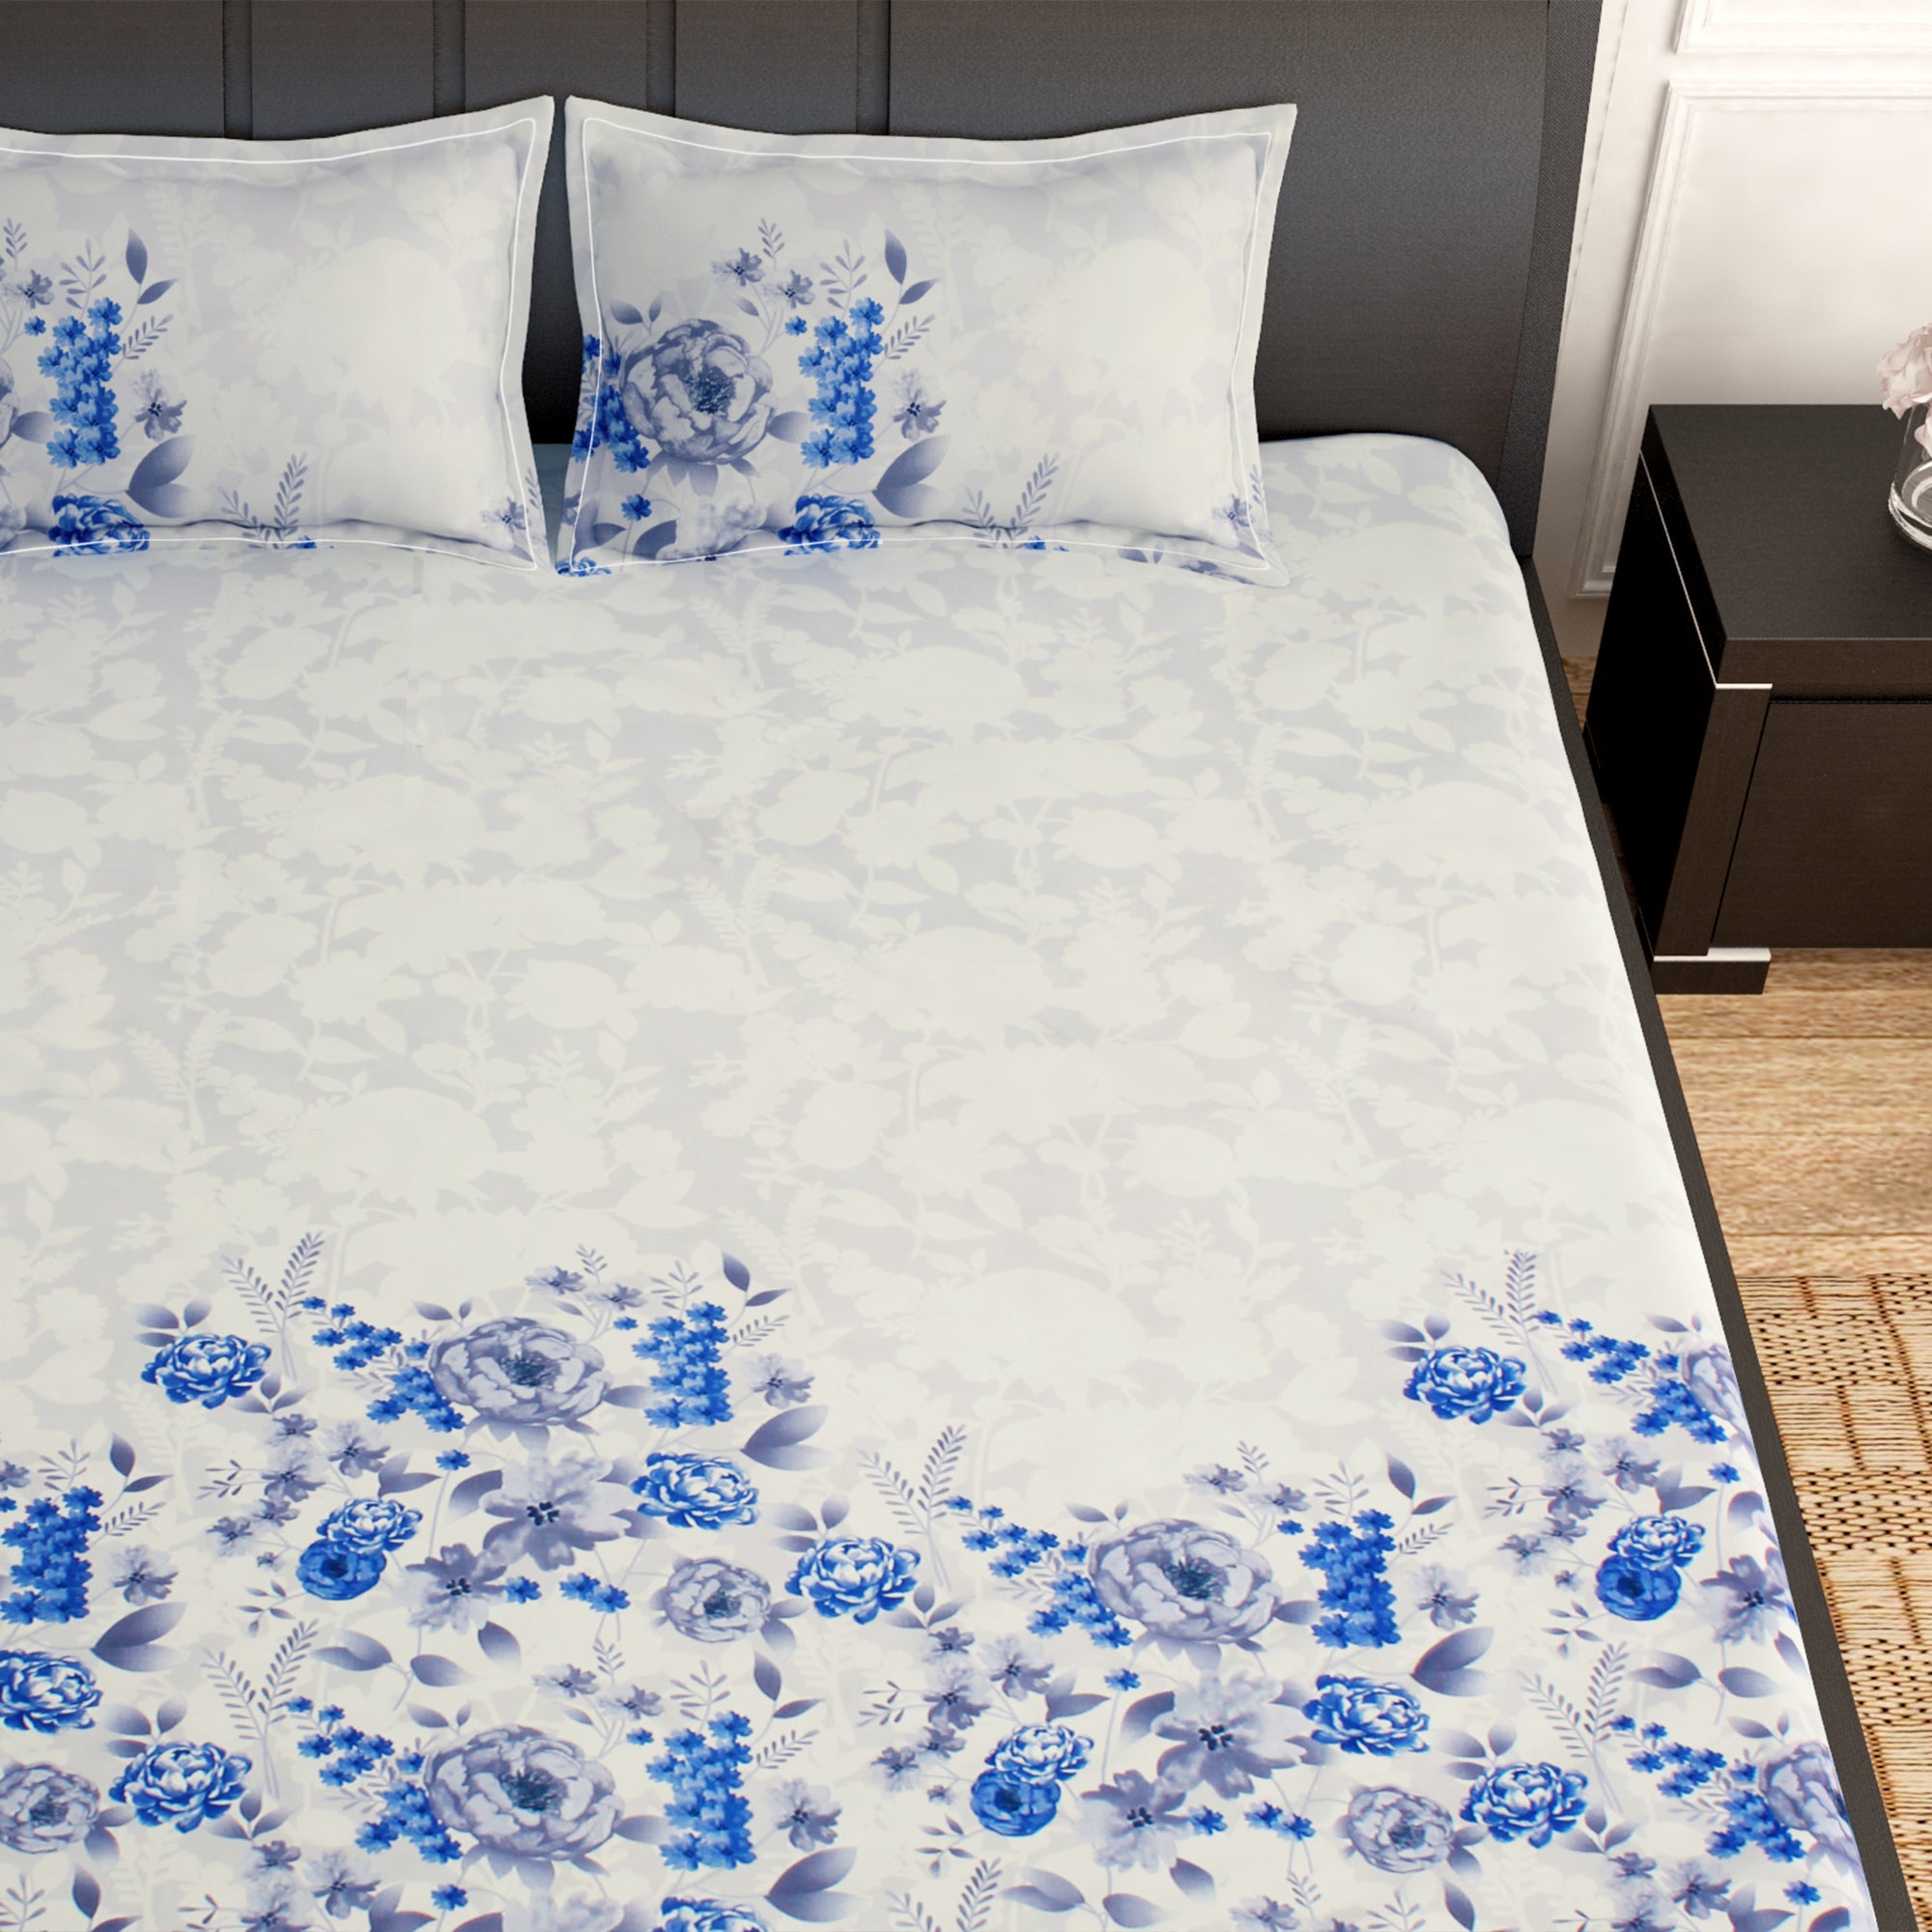 PAVO Tranquil Luxurious White Floral King Size Bedsheet